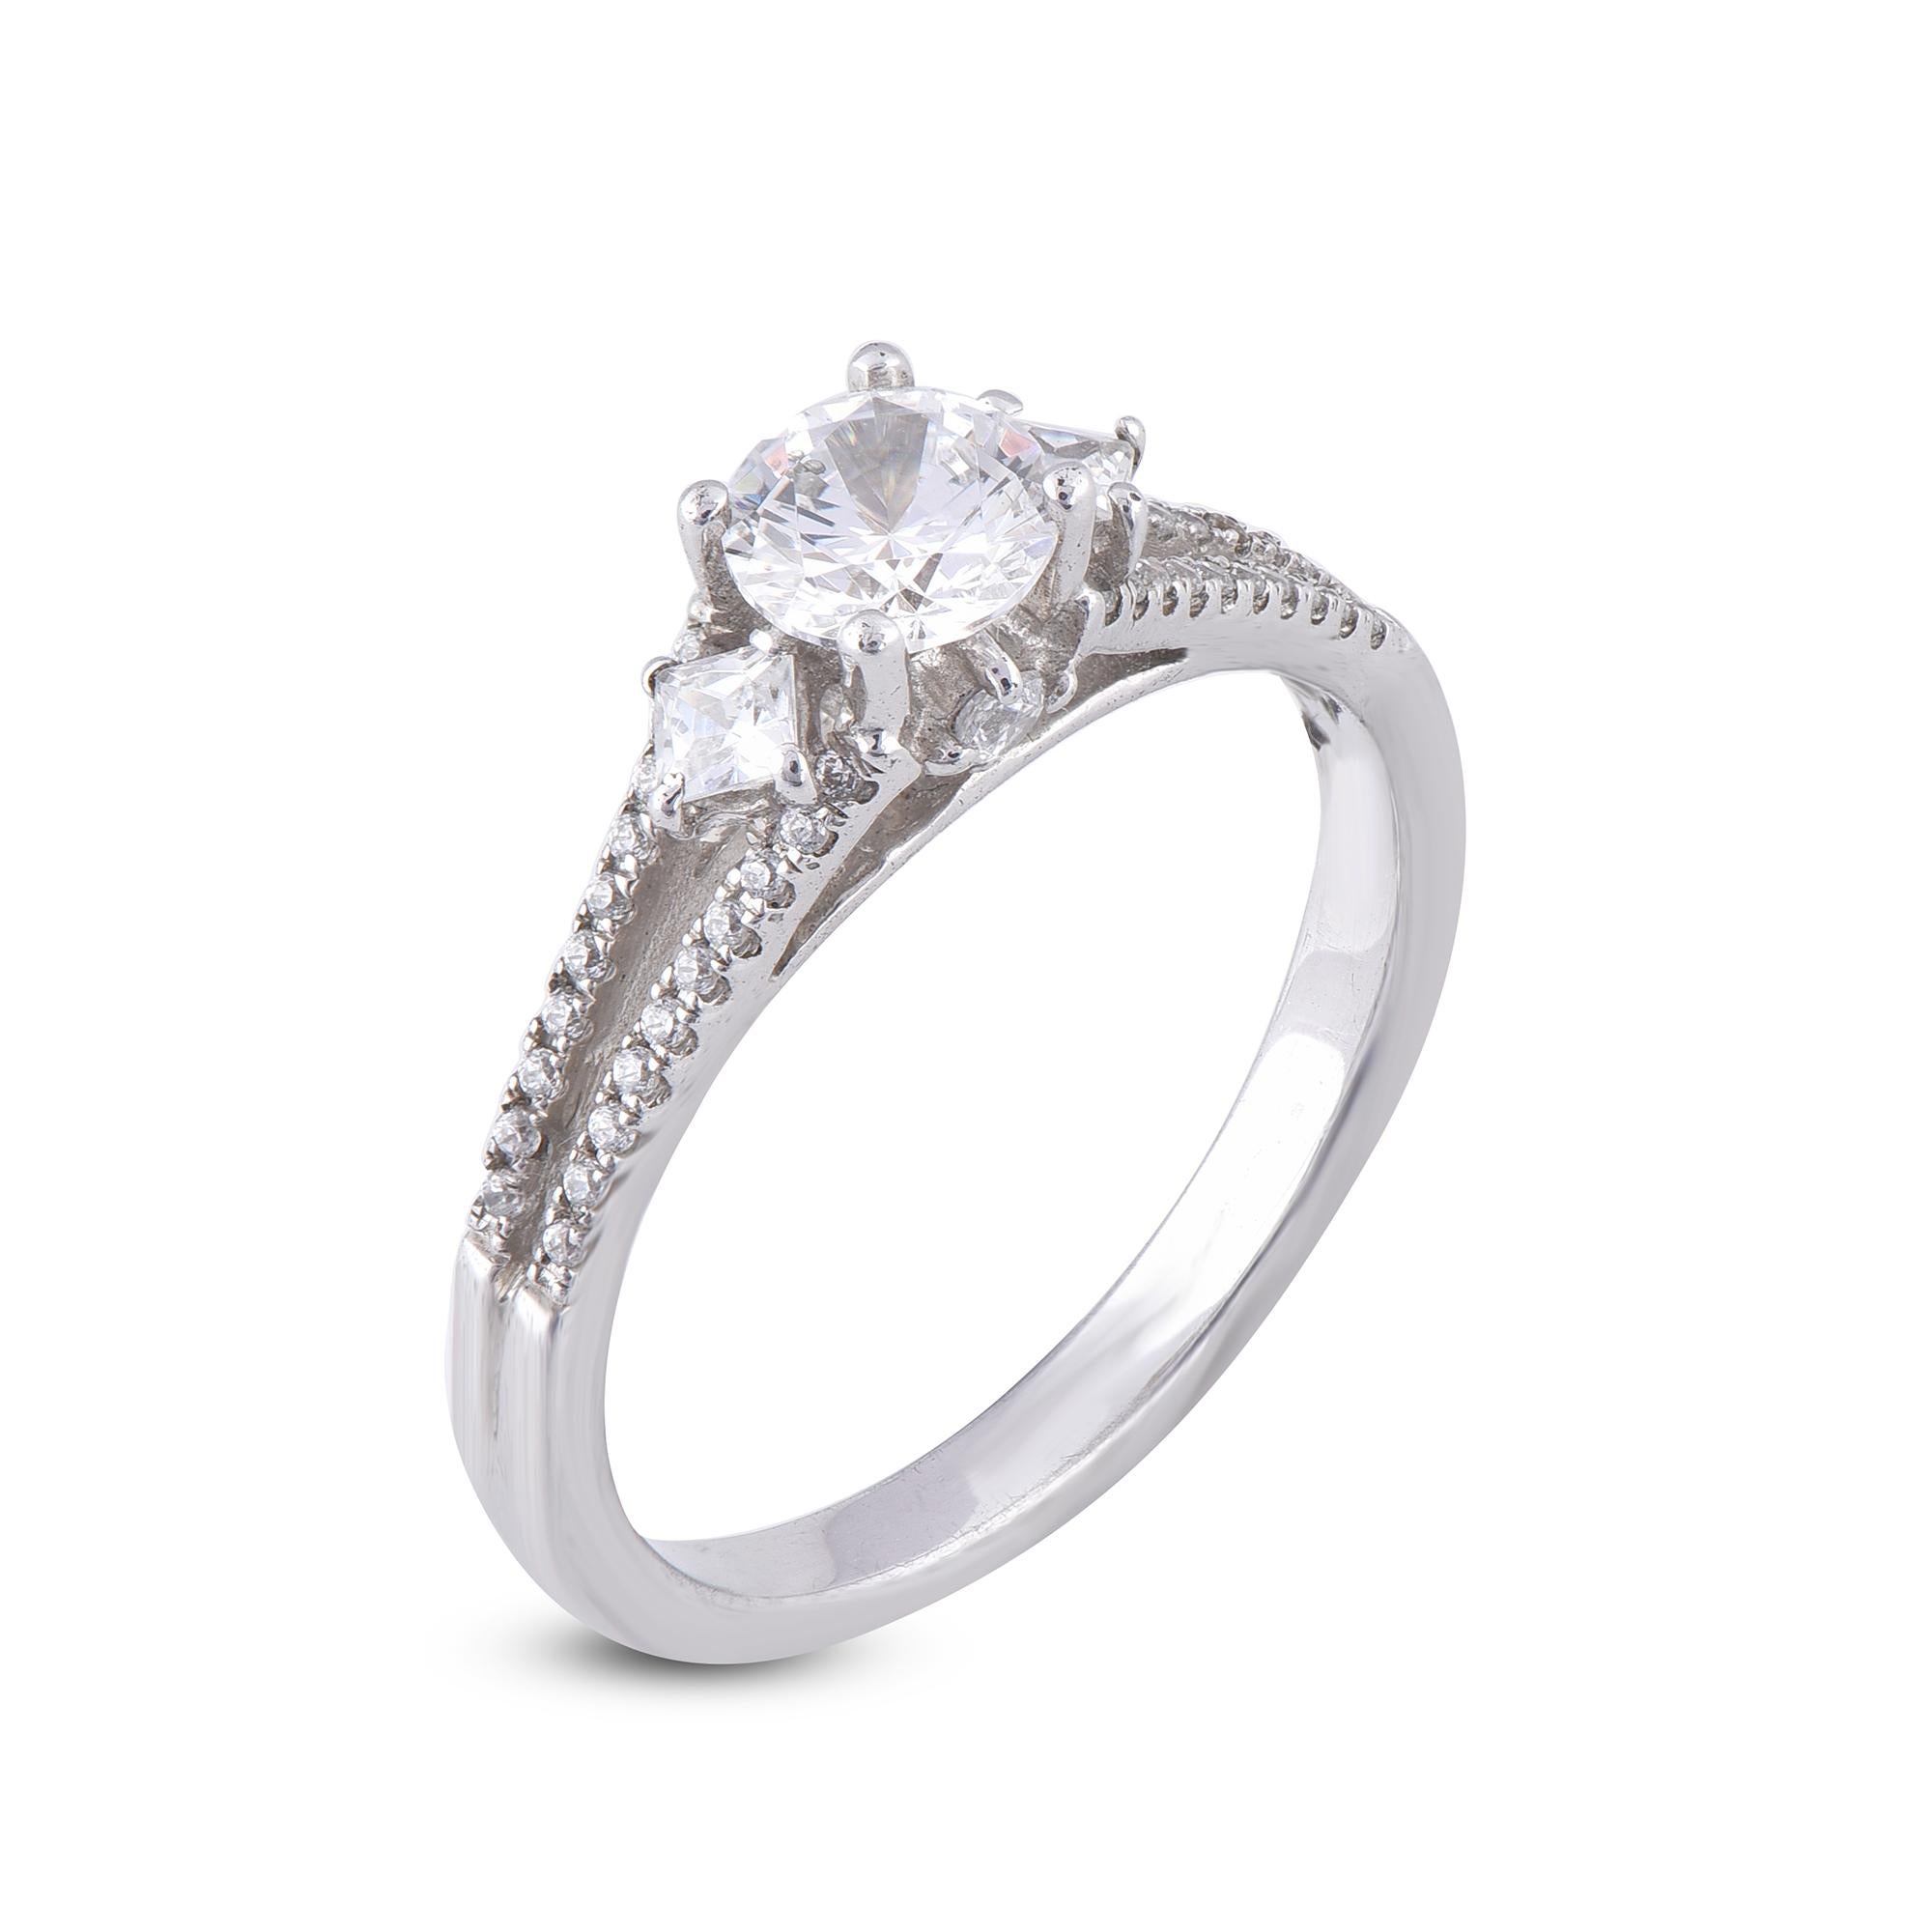 Truly exquisite, this diamond engagement ring is sure to be admired for the inherent classic beauty and elegance within its design. This diamond frame ring showcase 0.52 ct round centre stone and 2 princess cut stone with 0.0875 ct of surrounded